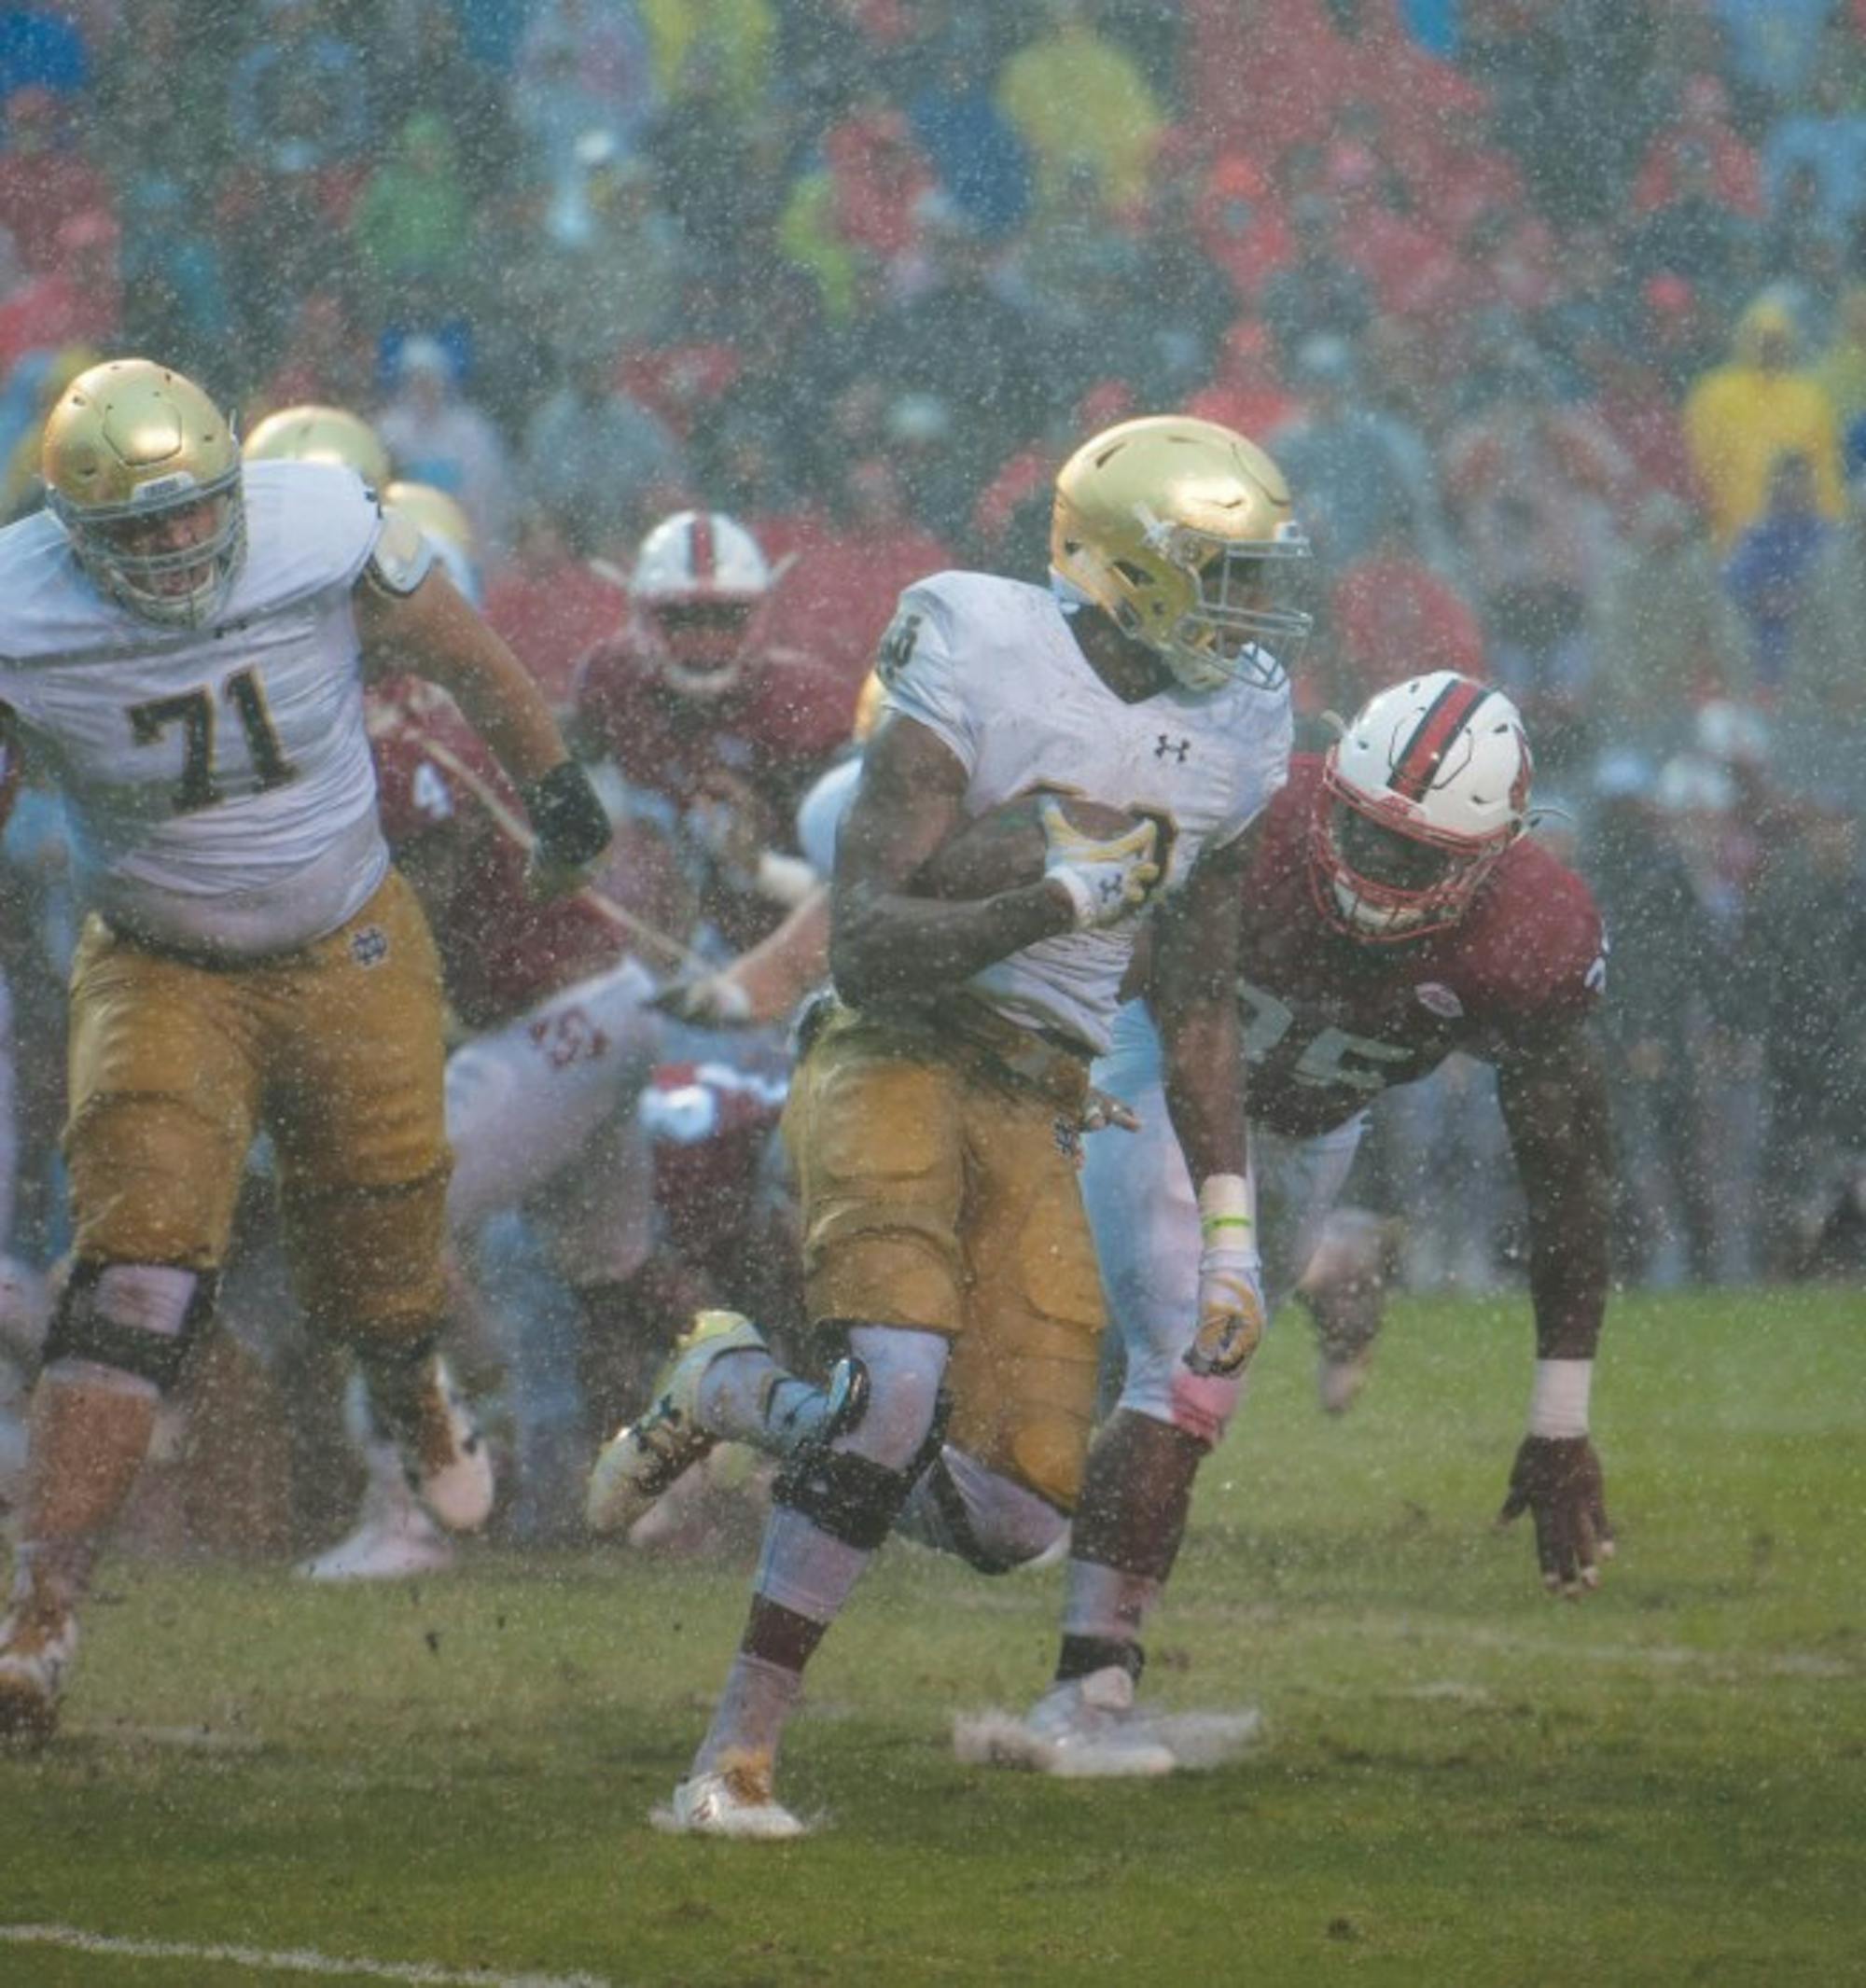 Irish sophomore running back Josh Adams runs the ball during Notre Dame’s 10-3 loss to North Carolina State on Saturday. Adams rushed for 51 yards on 14 attempts to bring his season total to 391 yards.